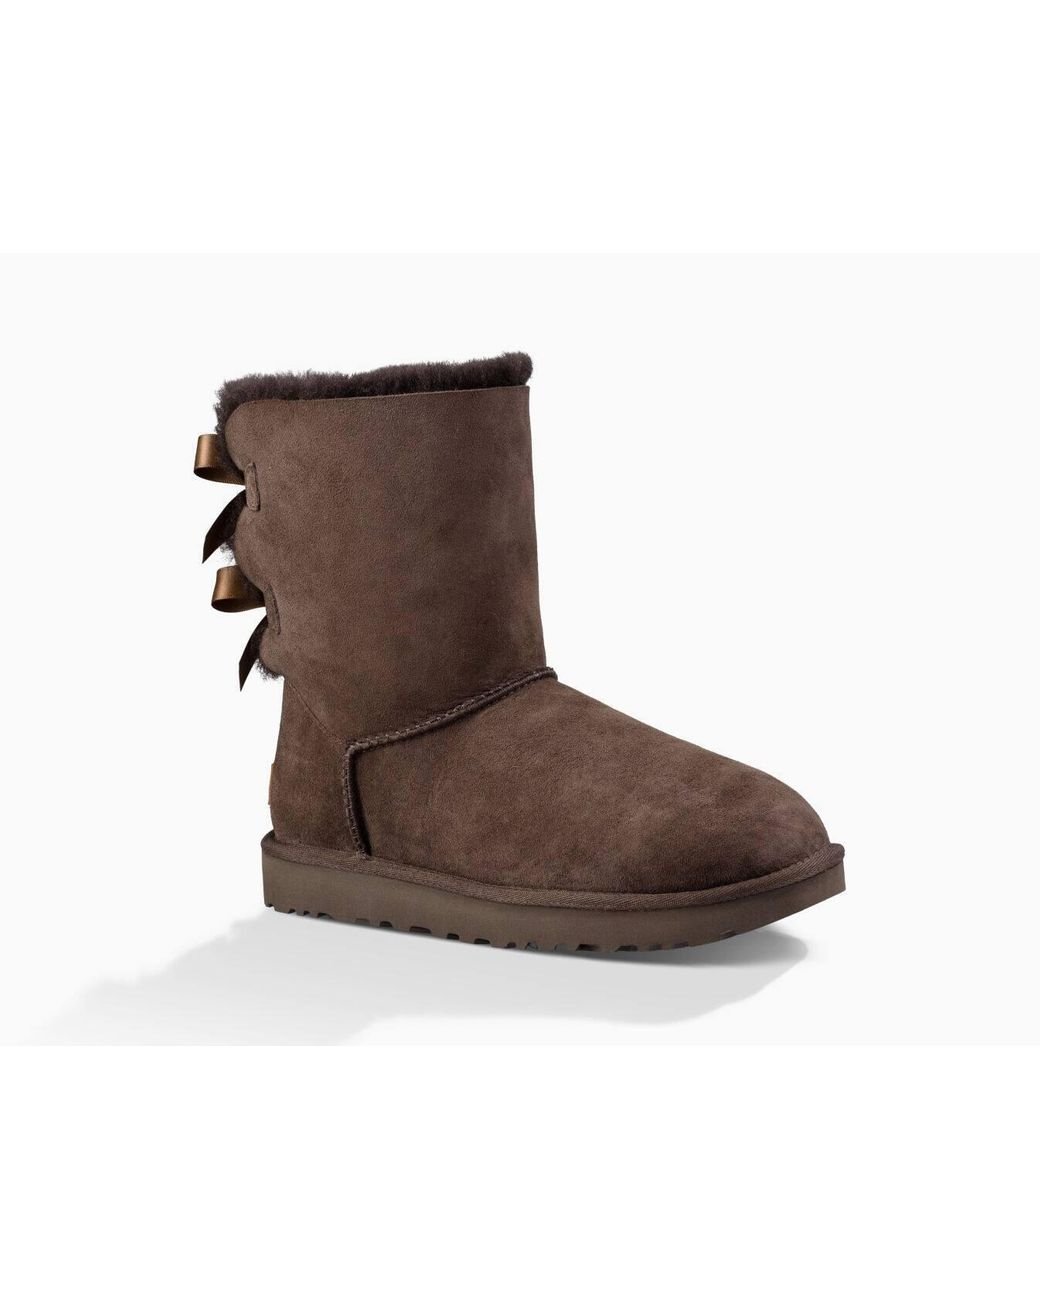 UGG Bailey Bow Ii Boot in Brown